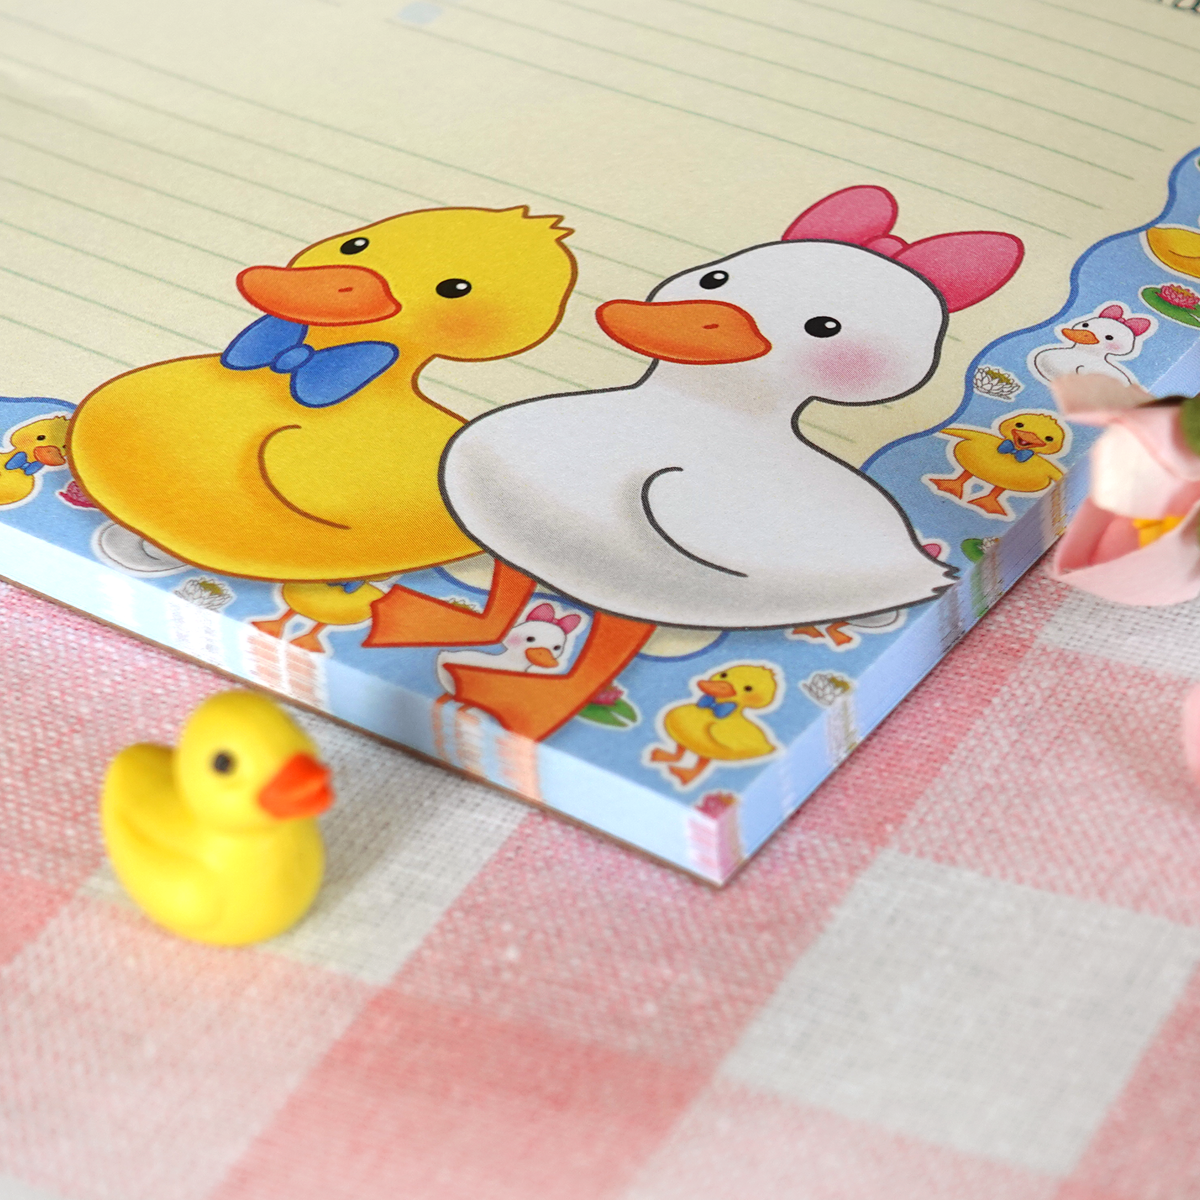 &quot;Little Duckies&quot; Weekly Planner Pad